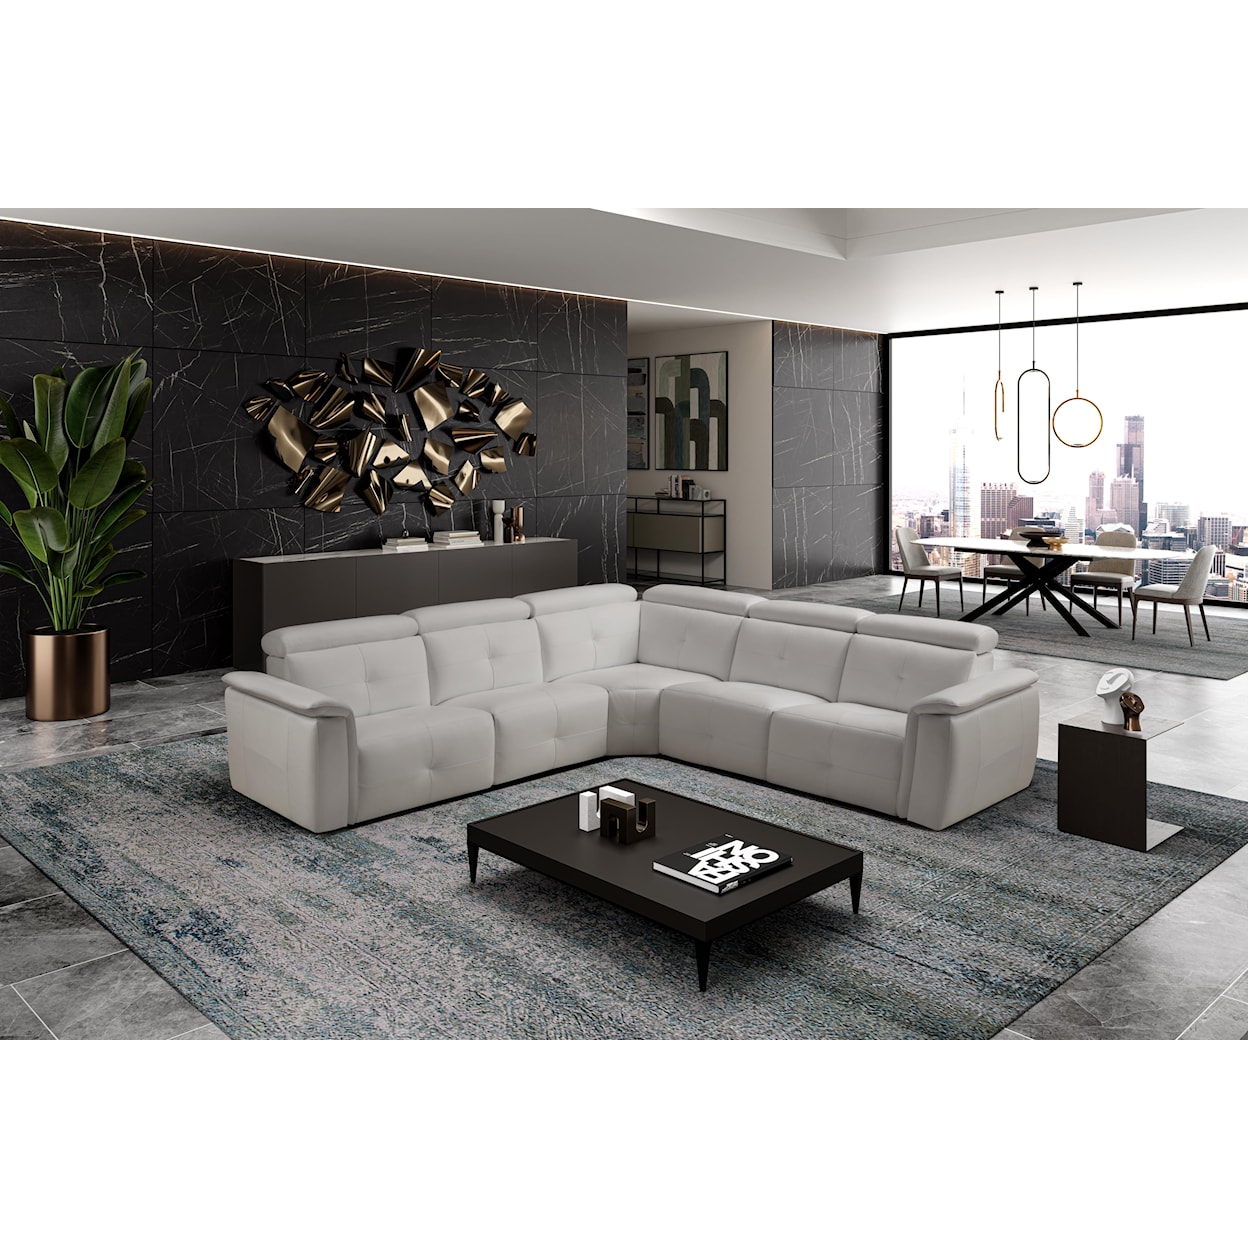 Chateau D'Ax CK7E L-Shaped Sectional with Power Footrests